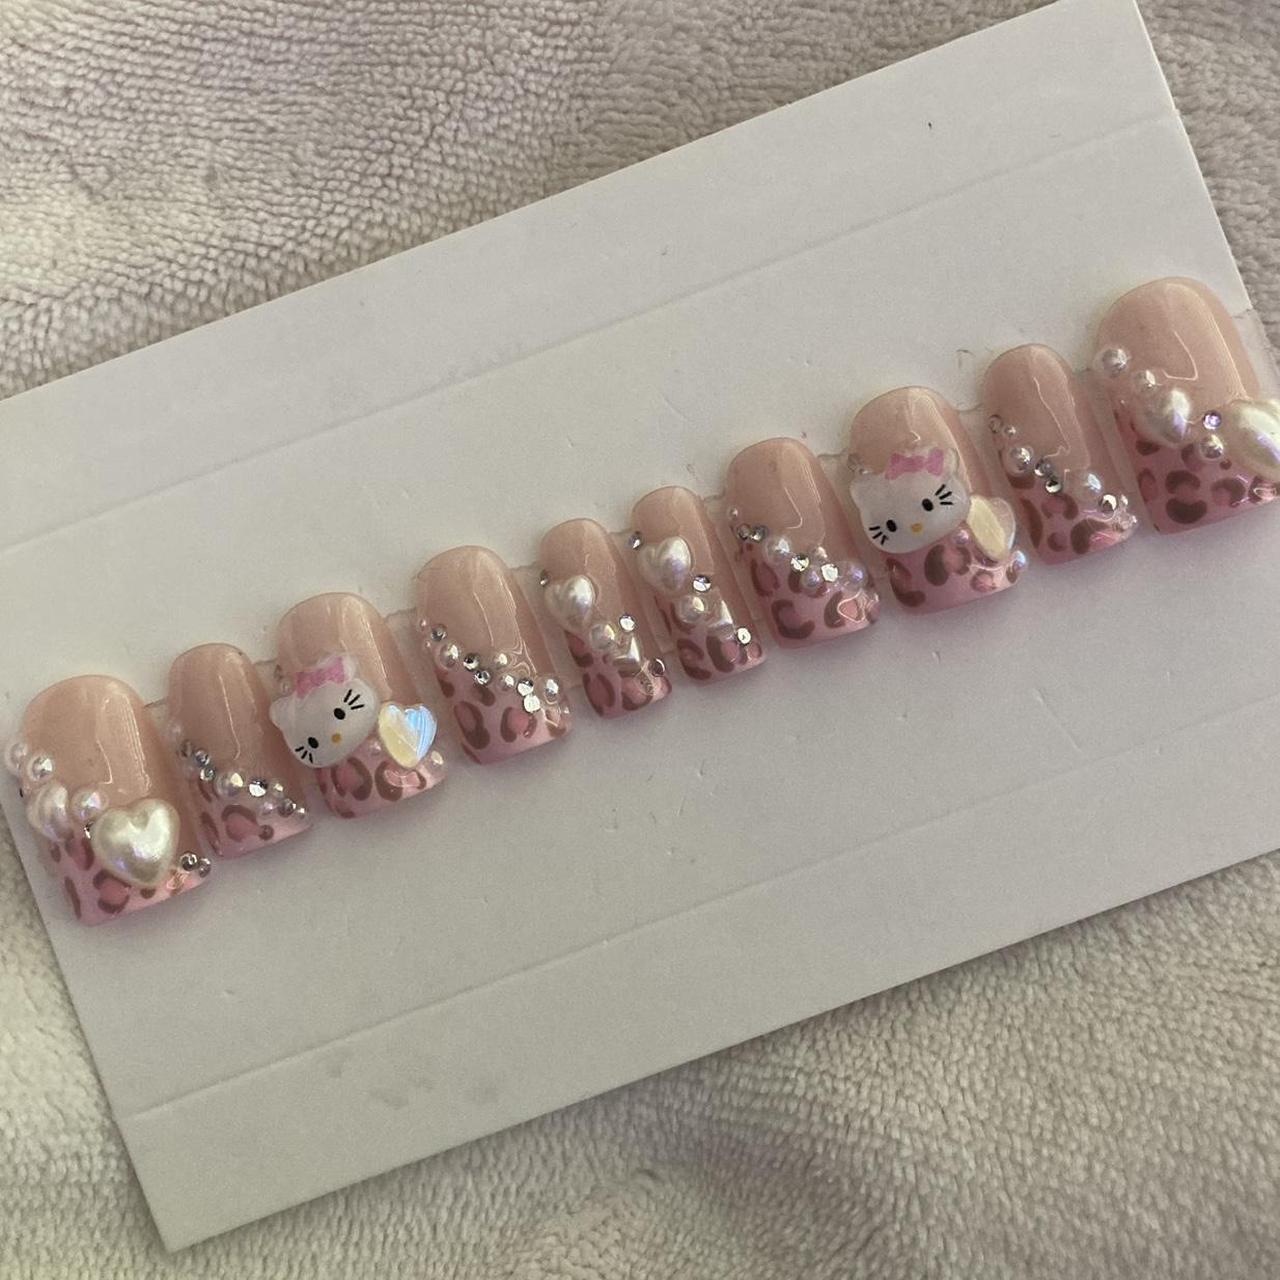 y2k hello kitty nails💅🏼💖 please message me for any... - Depop